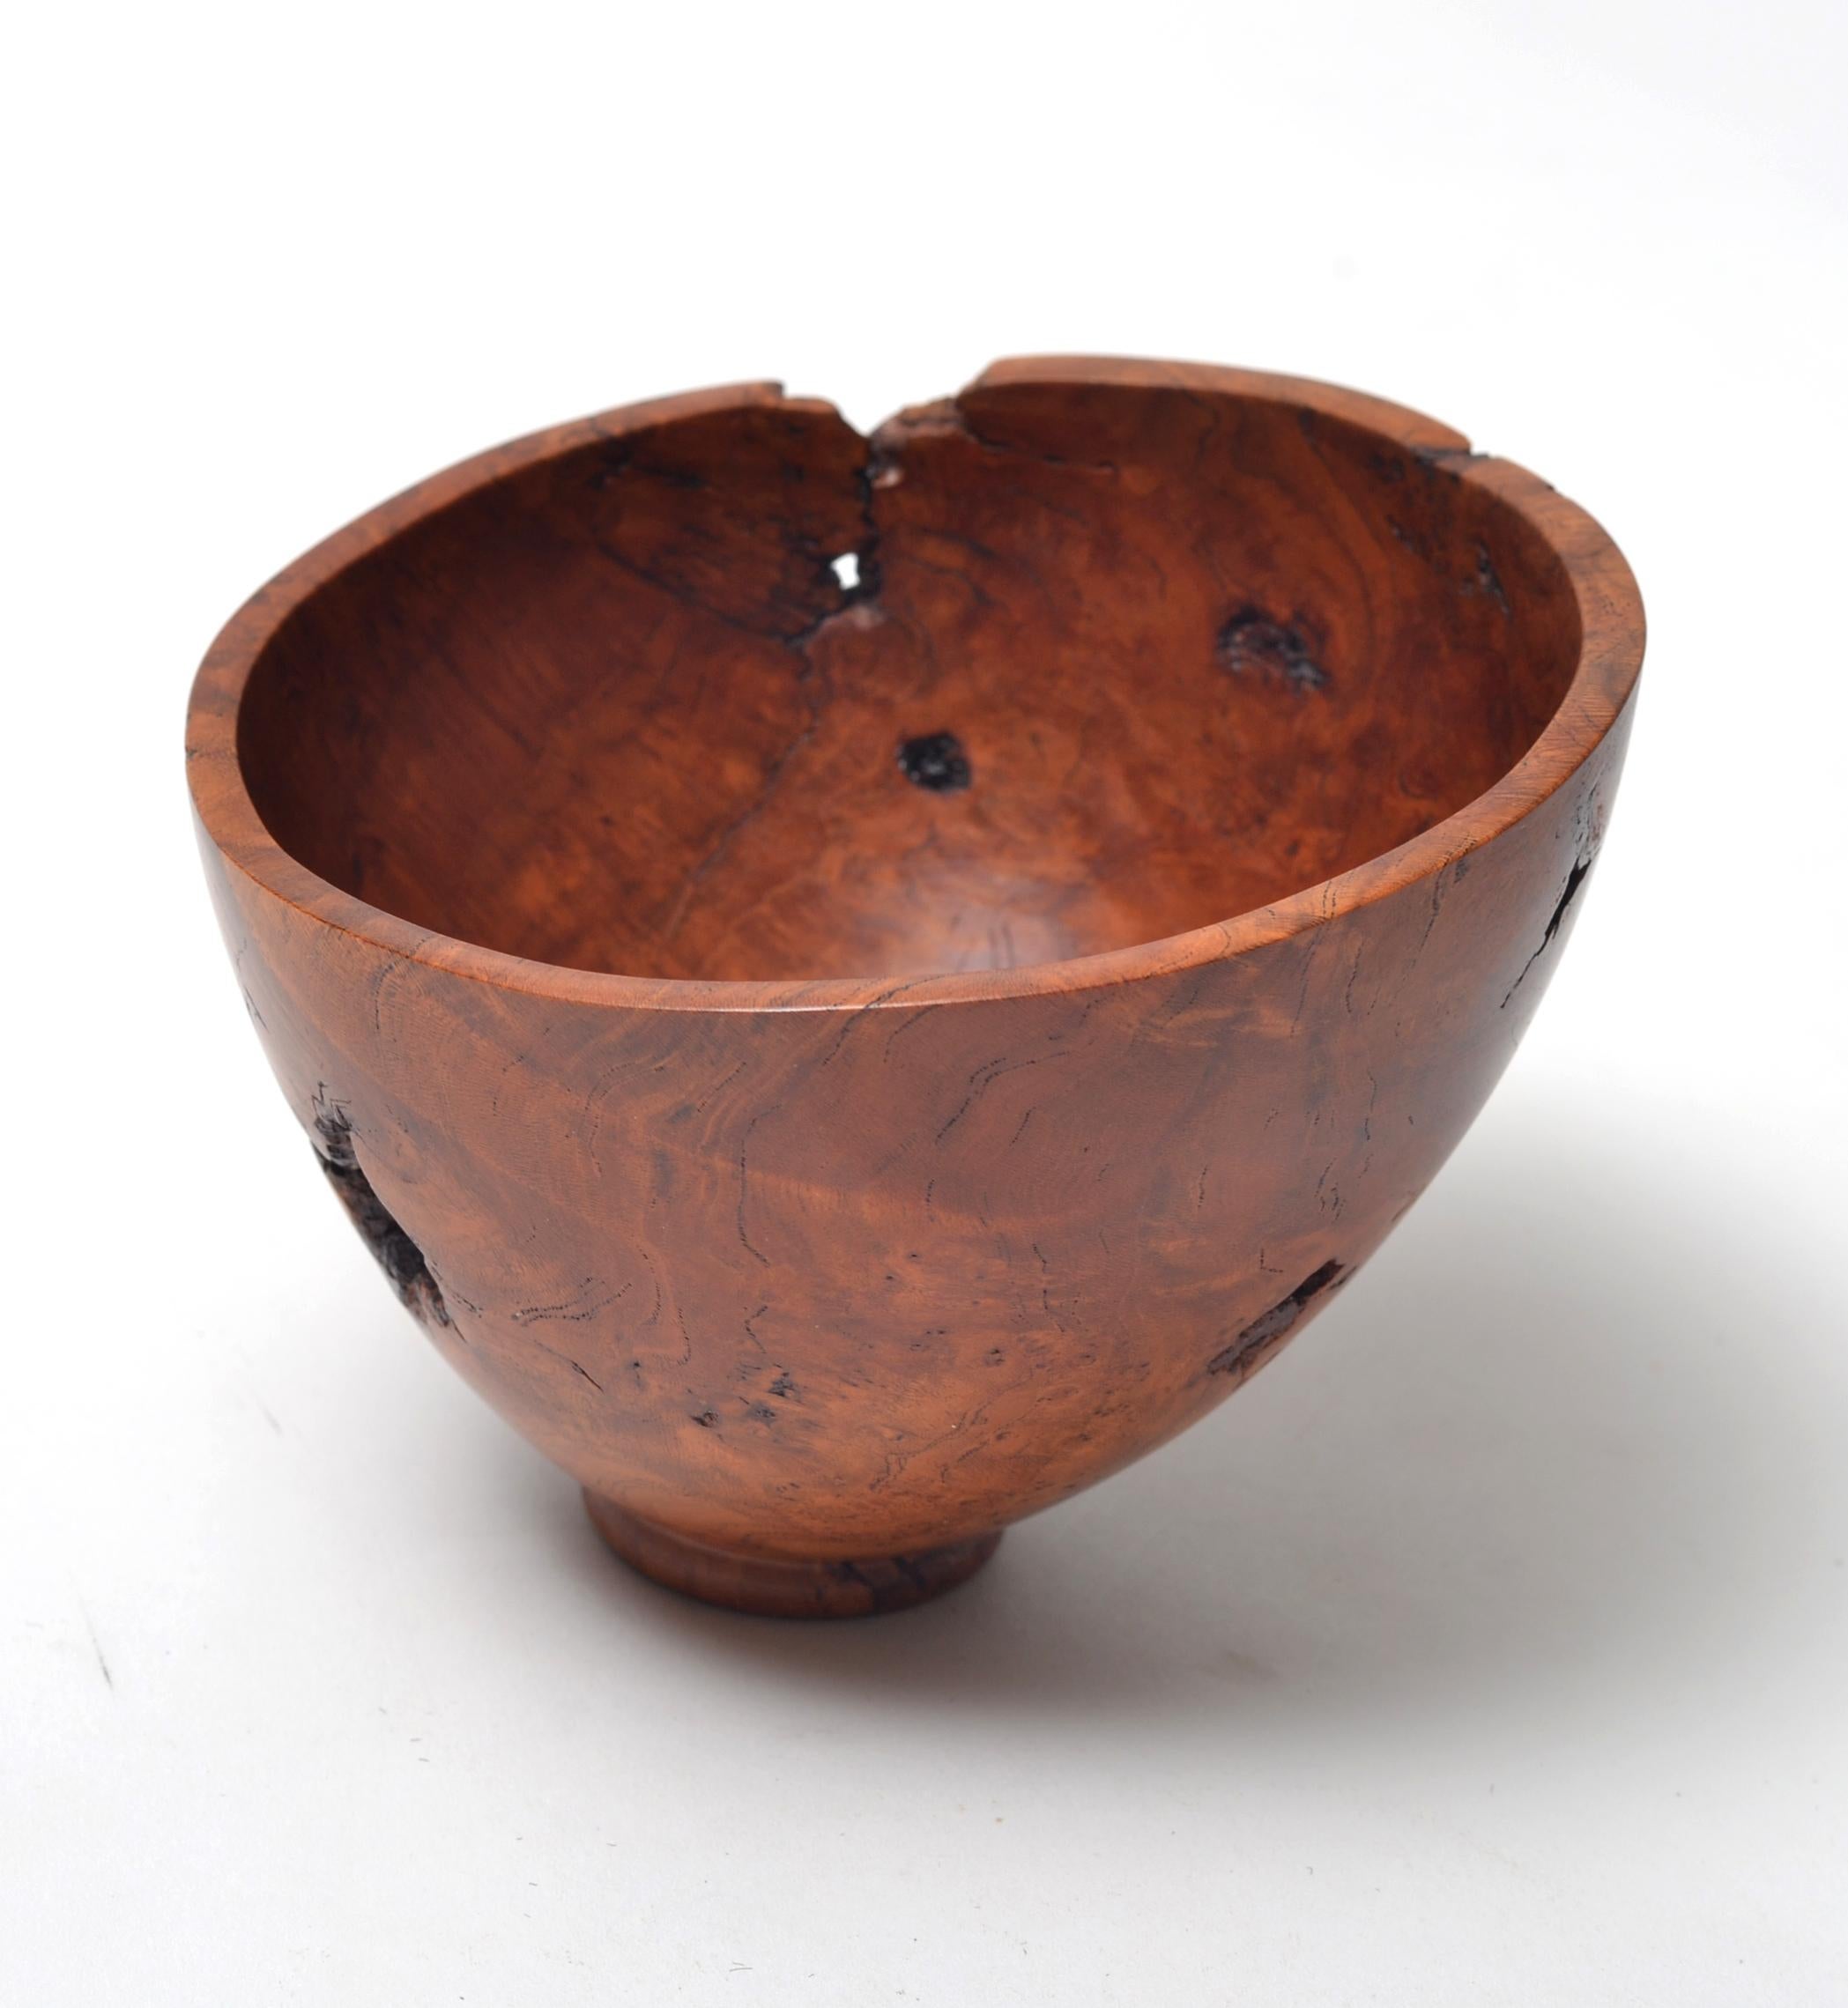 Decorative Wooden Bowl by Dustin Coates im Zustand „Gut“ im Angebot in Pittsburgh, PA